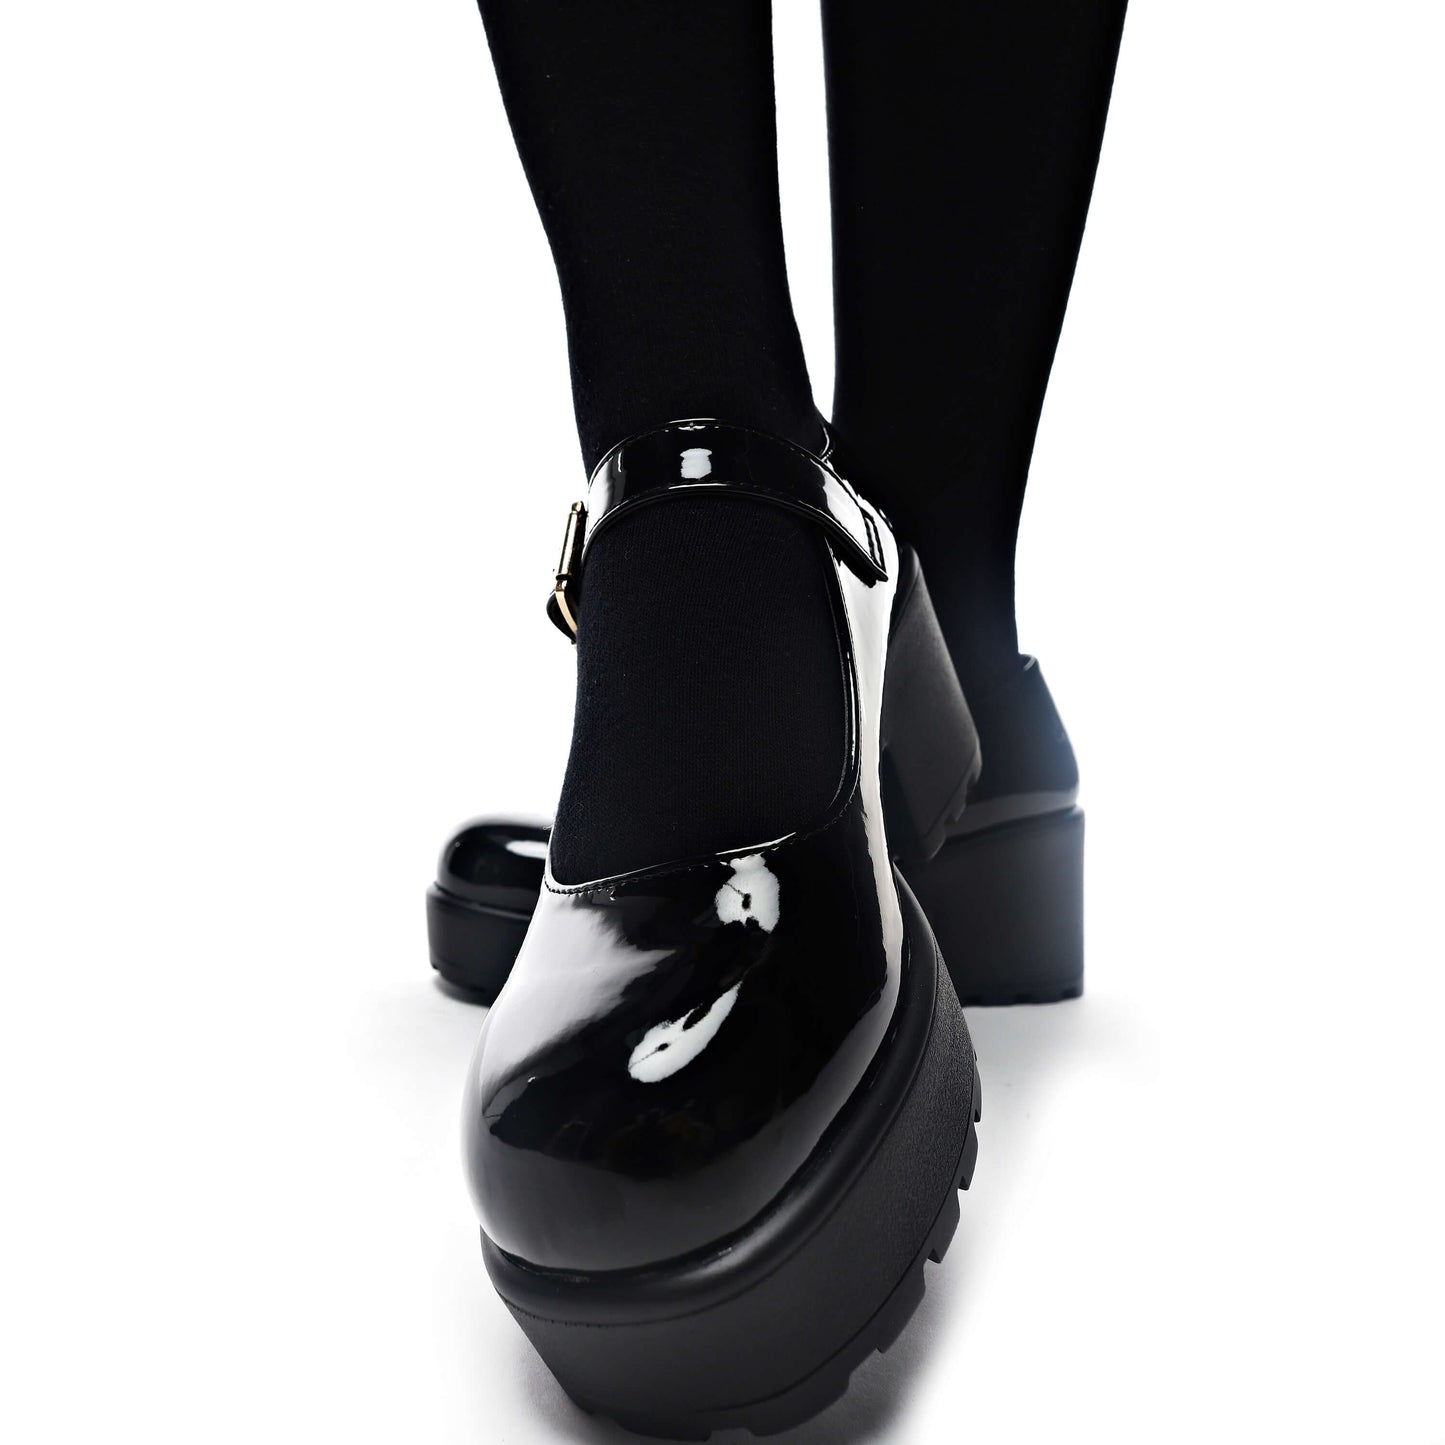 TIRA Black Mary Jane Shoes 'Patent Edition' - Mary Janes - KOI Footwear - Black Patent - Front View